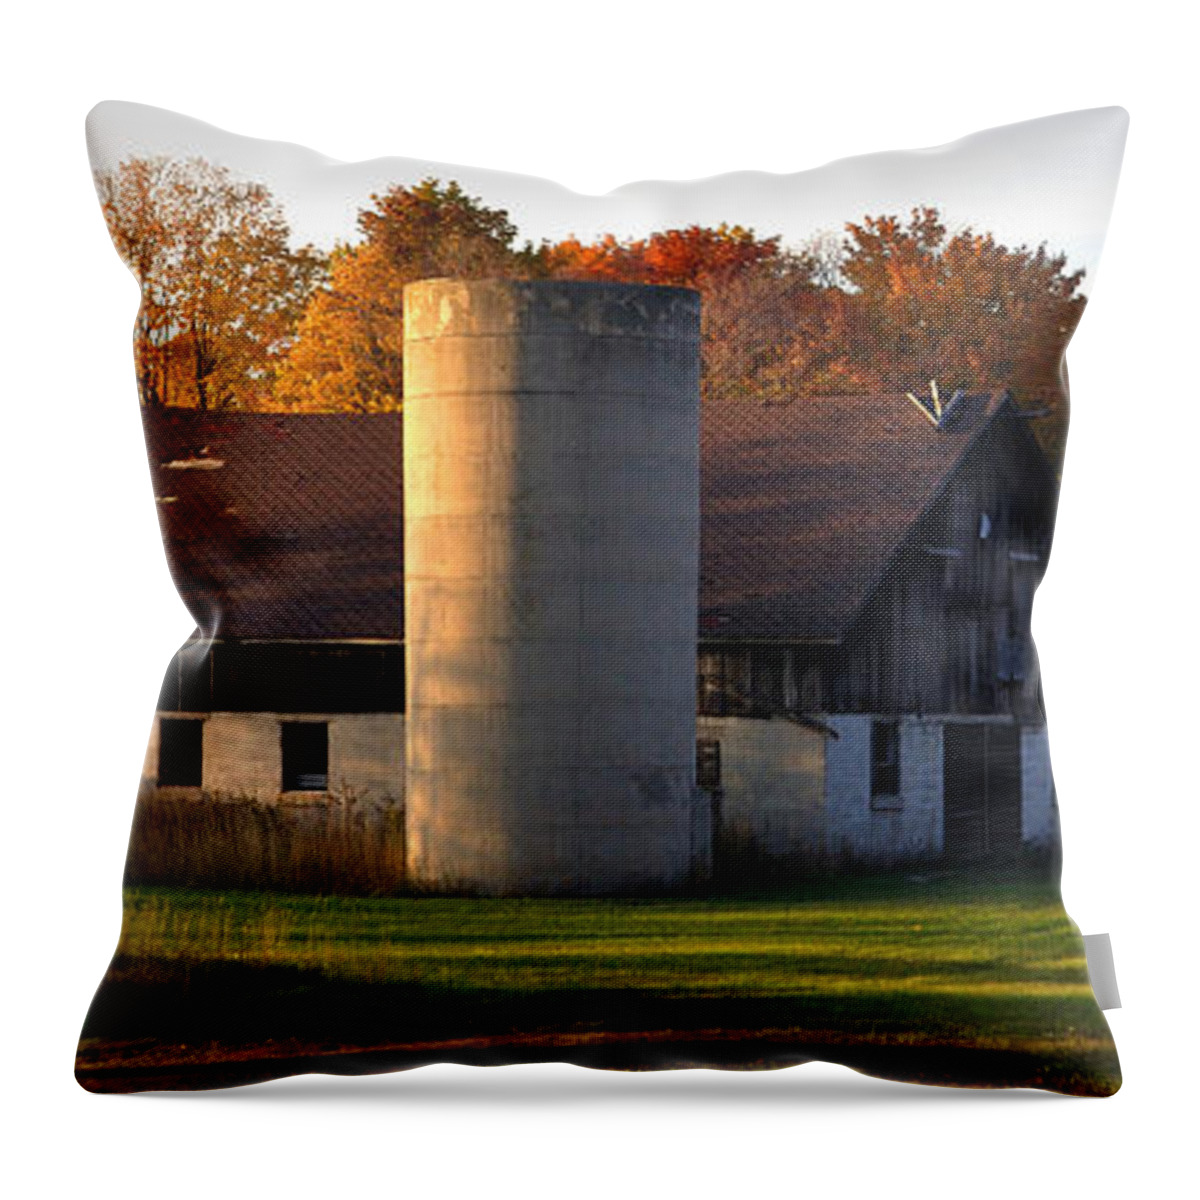 Fall Throw Pillow featuring the photograph Autumn Evening by Tim Nyberg